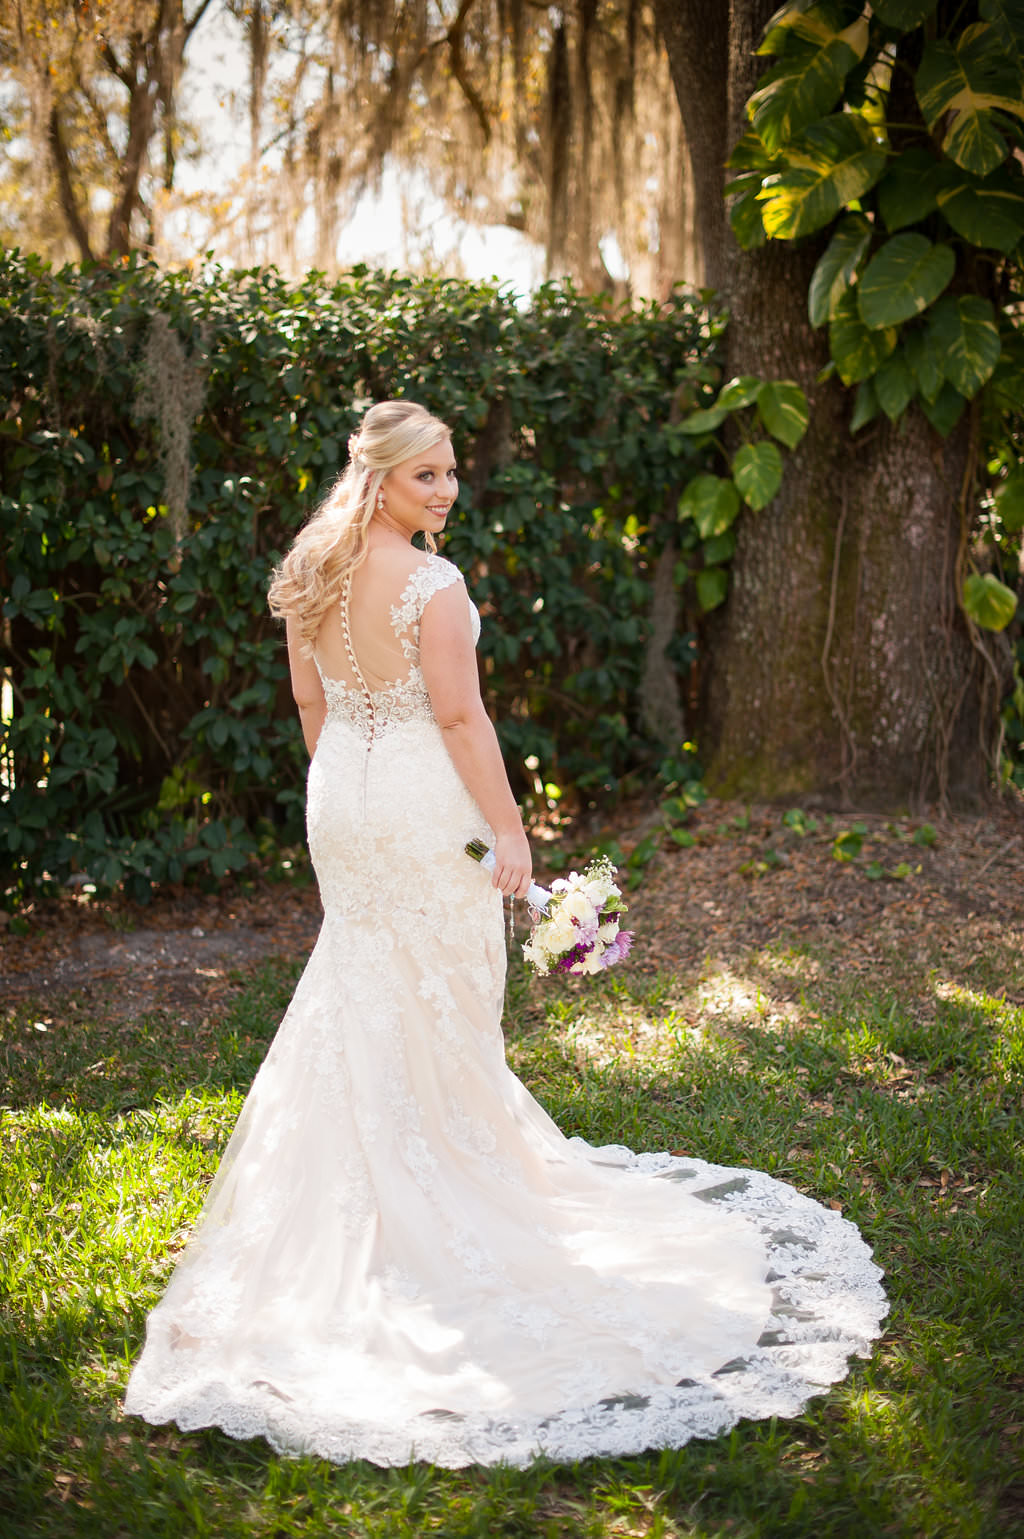 Outdoor Garden Bridal Portrait in Allure Bridal Lace Back with Button Wedding Dress | Tampa Bay Wedding